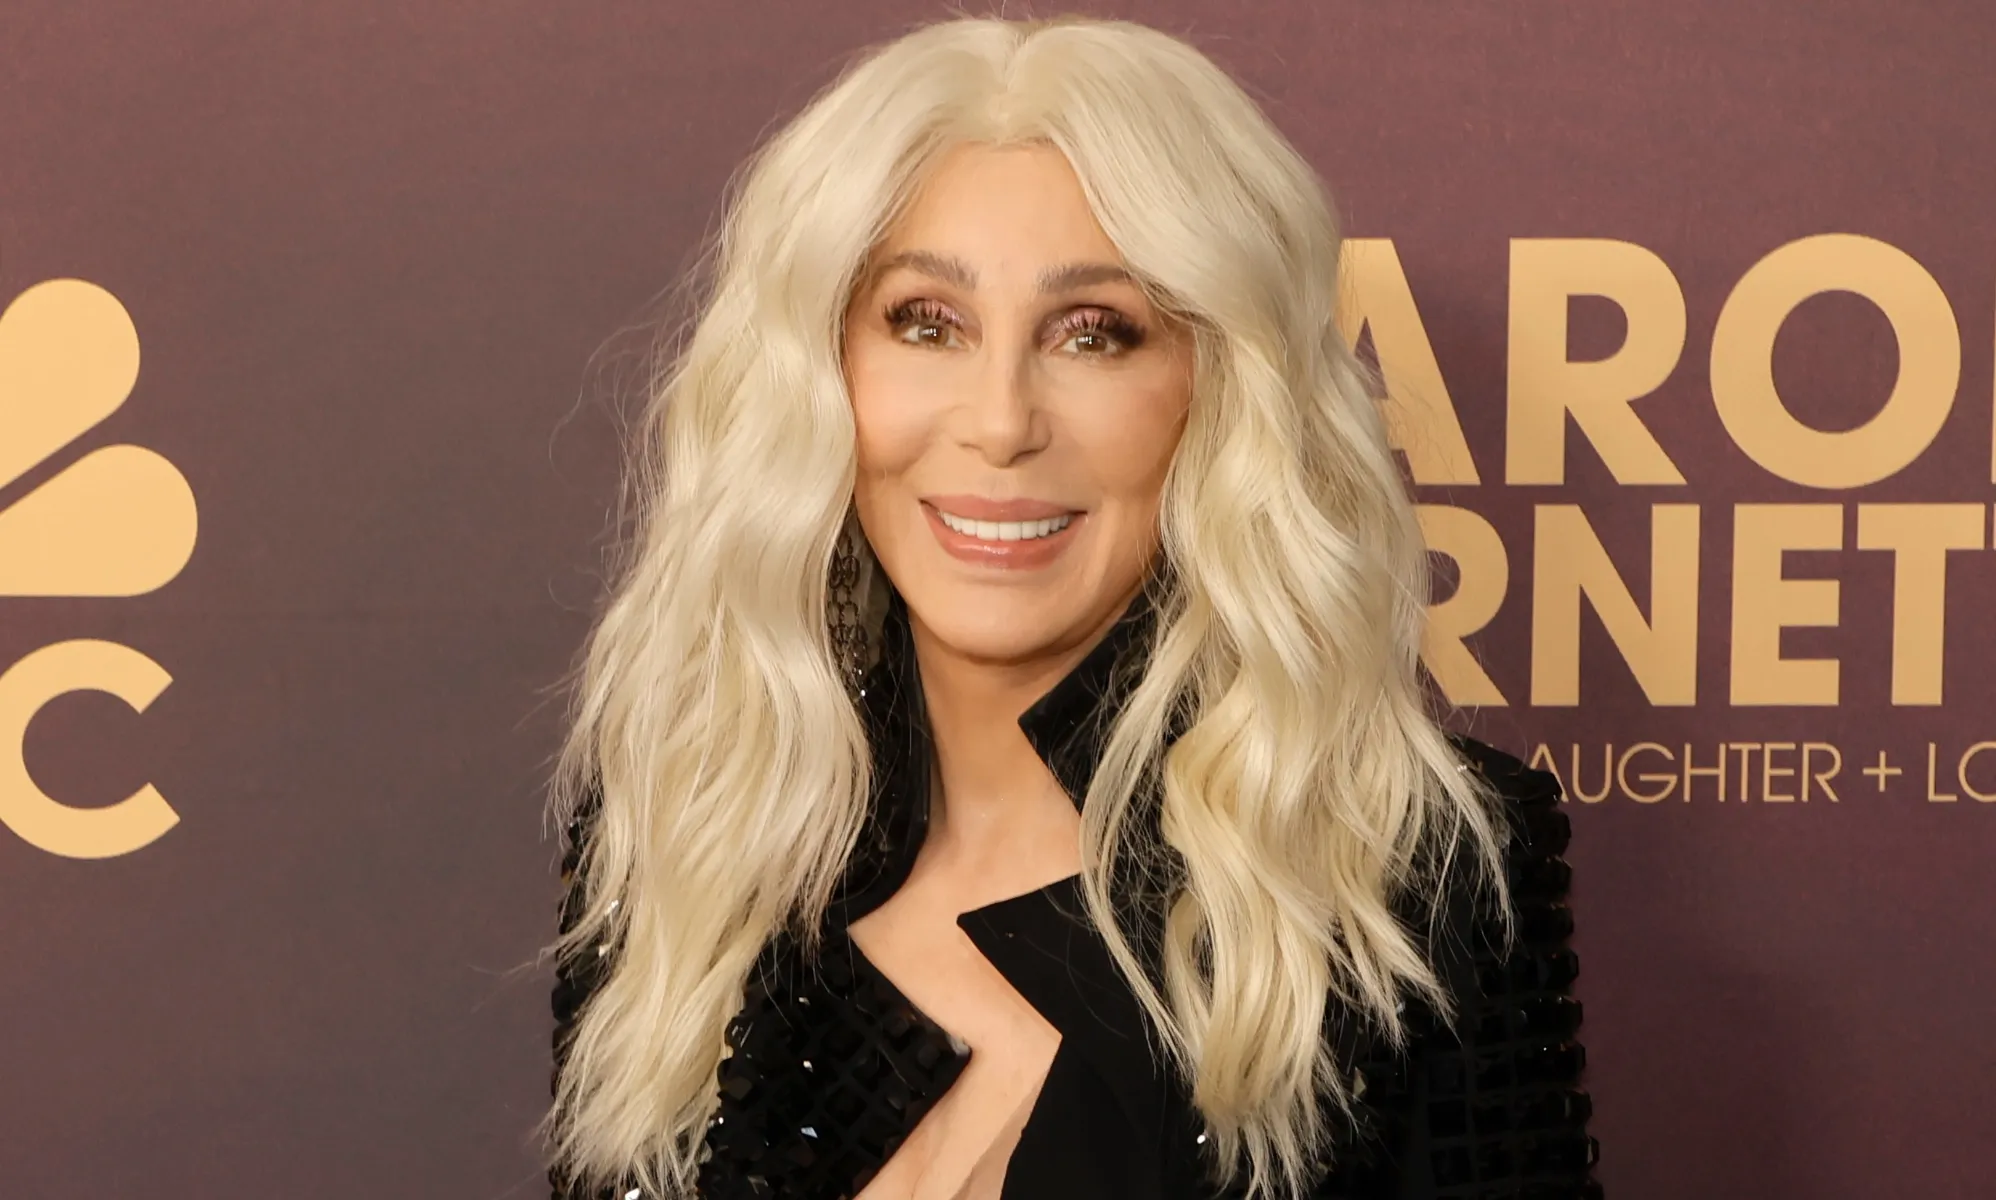 Cher and Sinead O’Connor among Rock & Roll Hall of Fame nominees